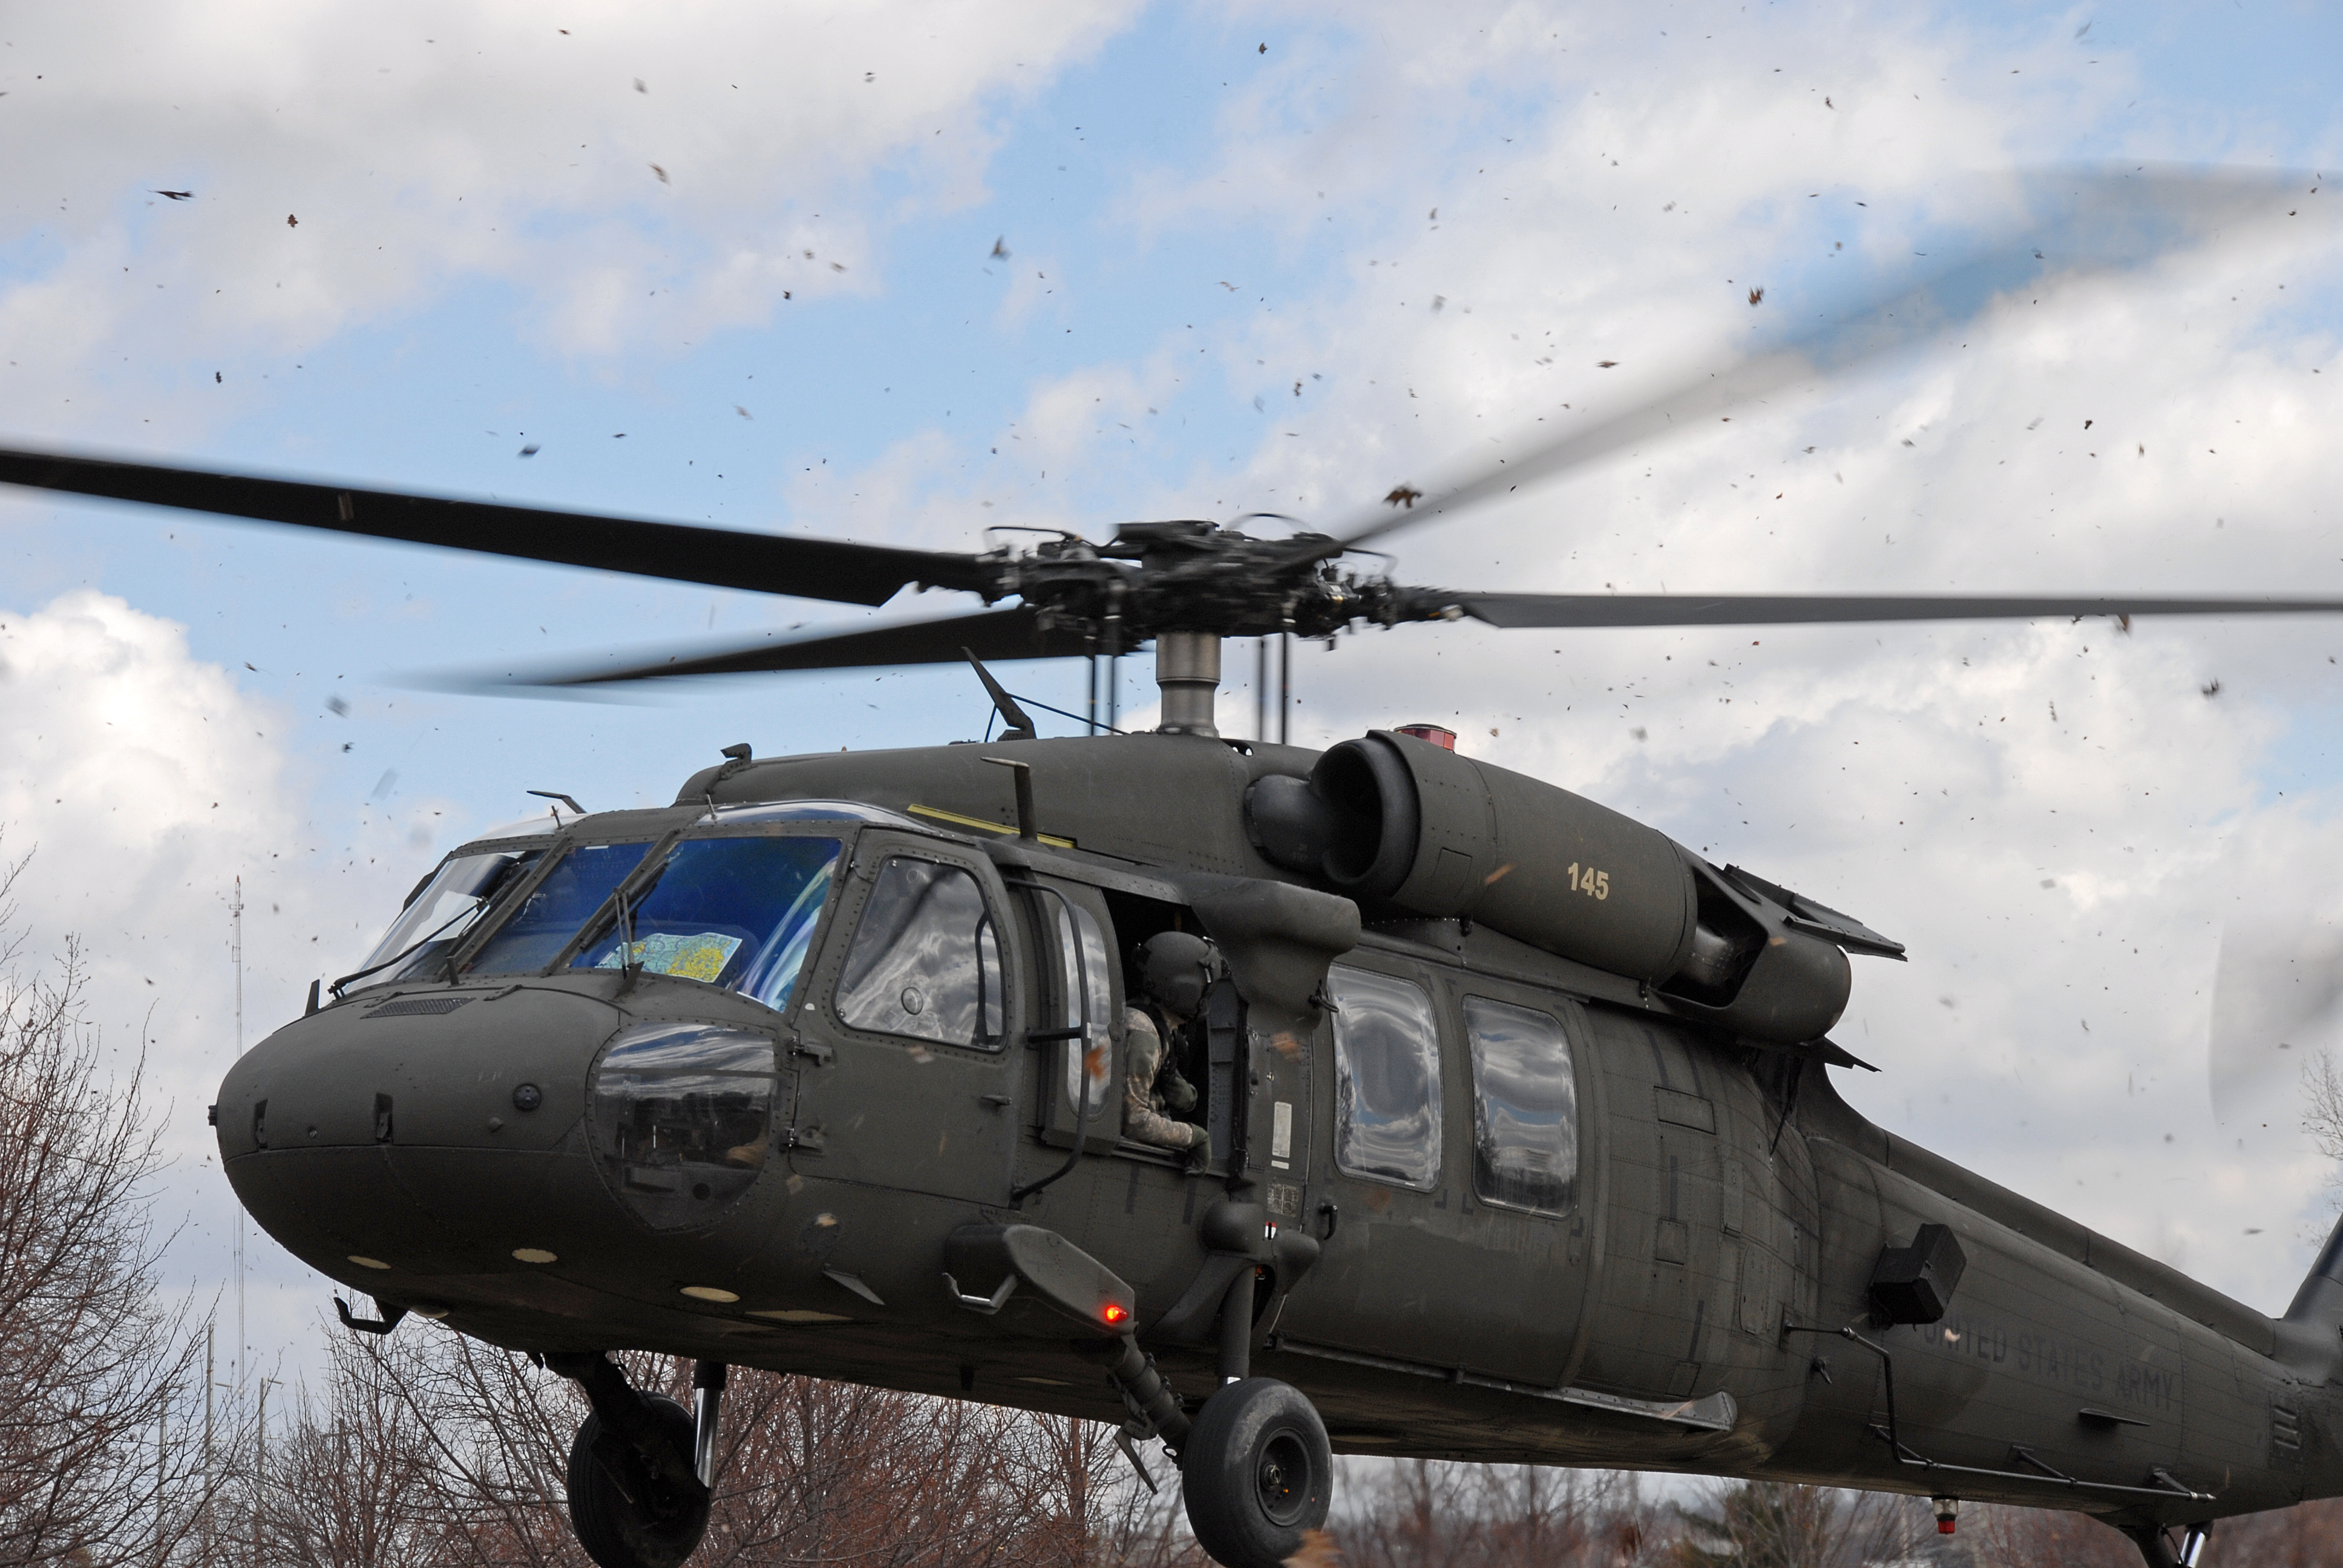 Drone Collides With Us Army Black Hawk Helicopter Over New York